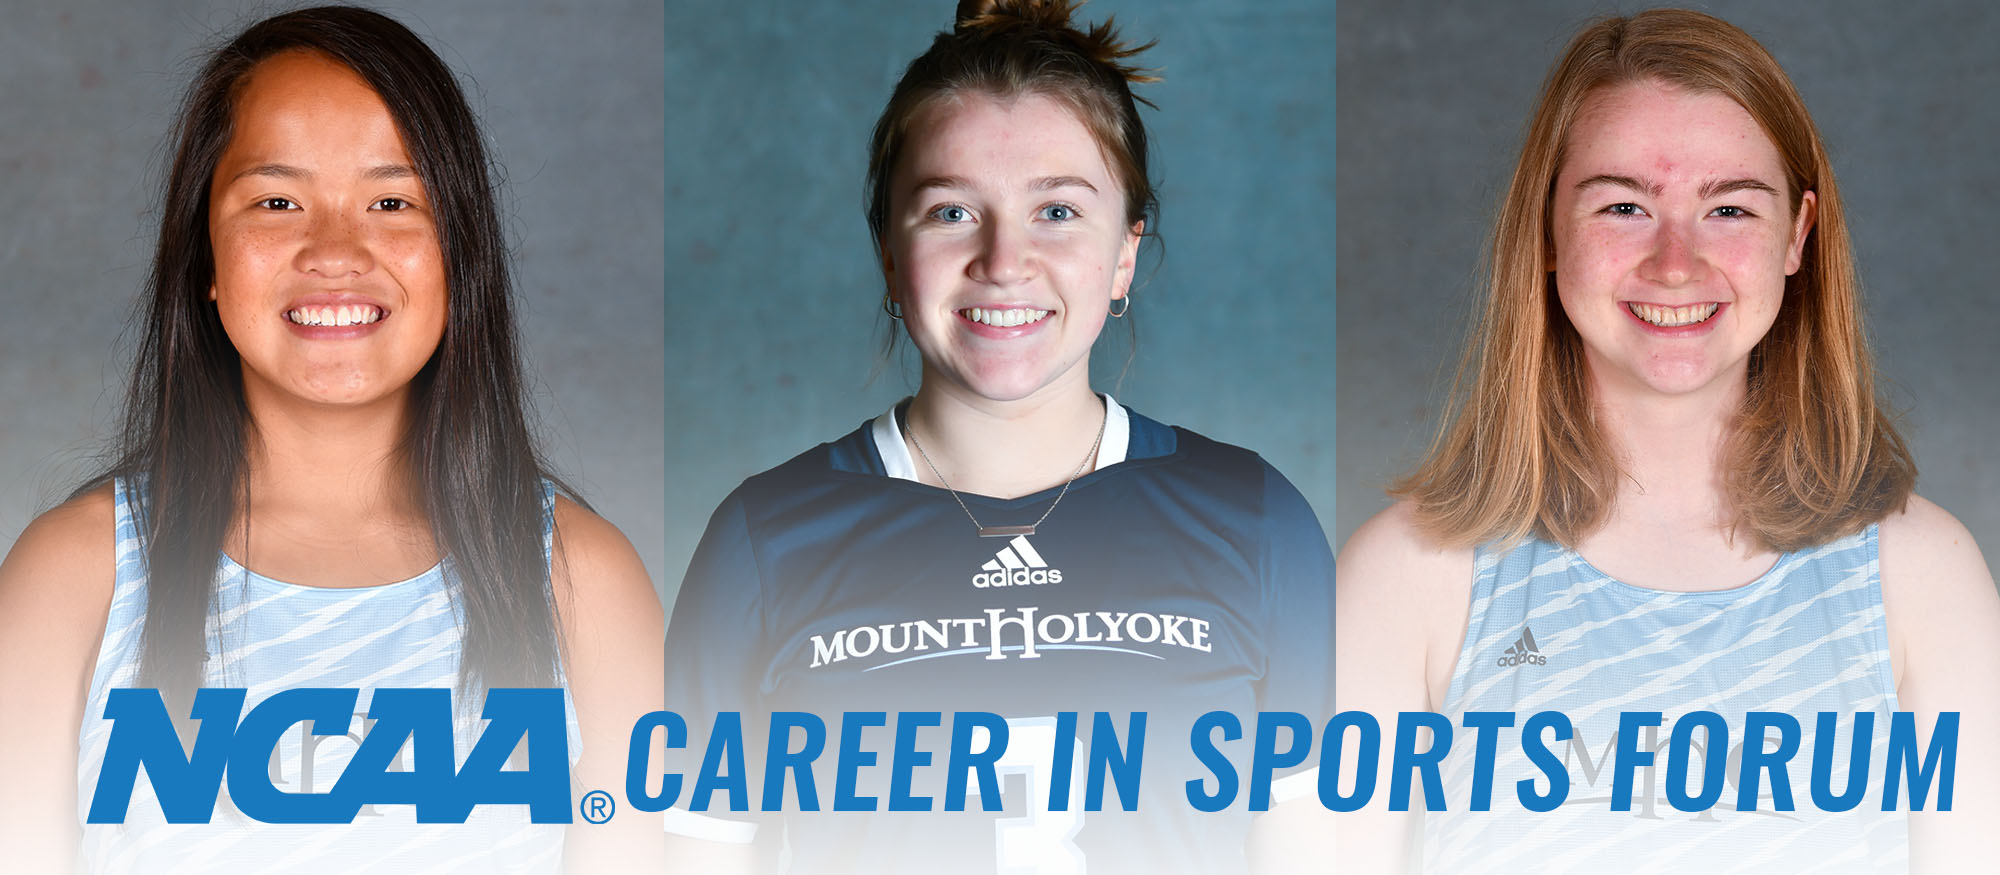 Three Mount Holyoke College Student-Athletes Selected to Attend NCAA Career in Sports Forum May 26-28